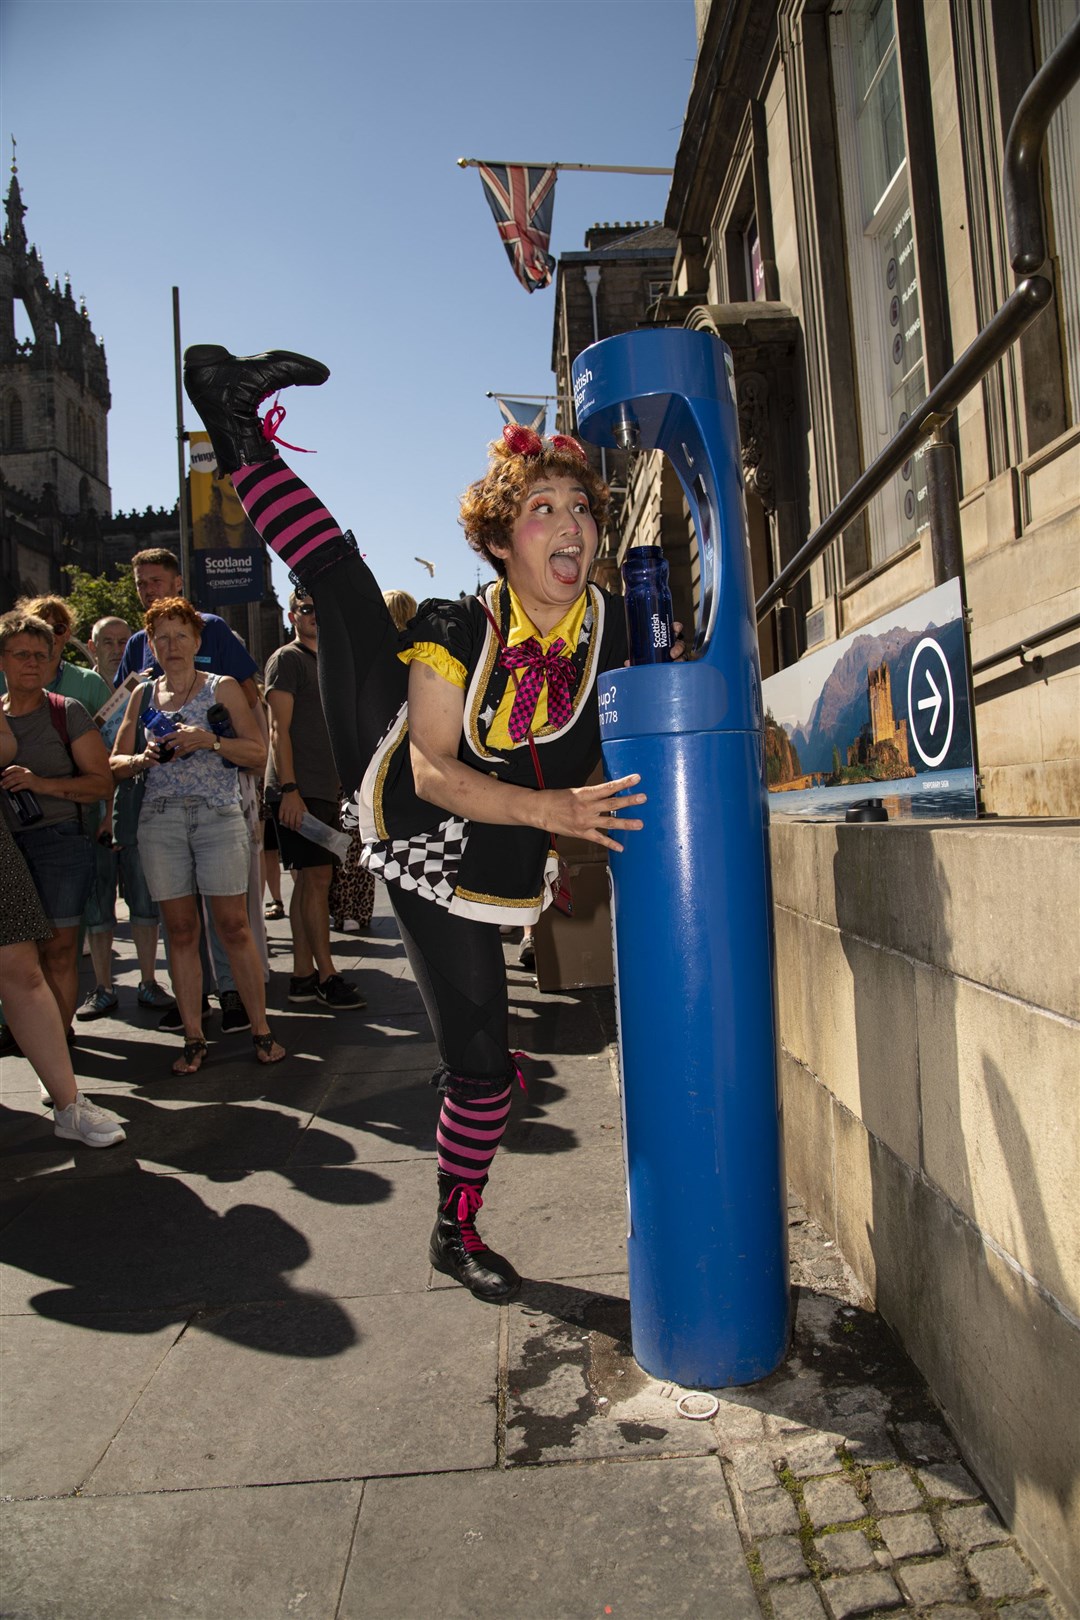 To thank the public, Scottish Water gave away free refillable bottles at one of our busiest Top Up Taps in the Royal Mile, Edinburgh during the festival. Picture Paul Watt/Scottish Water.